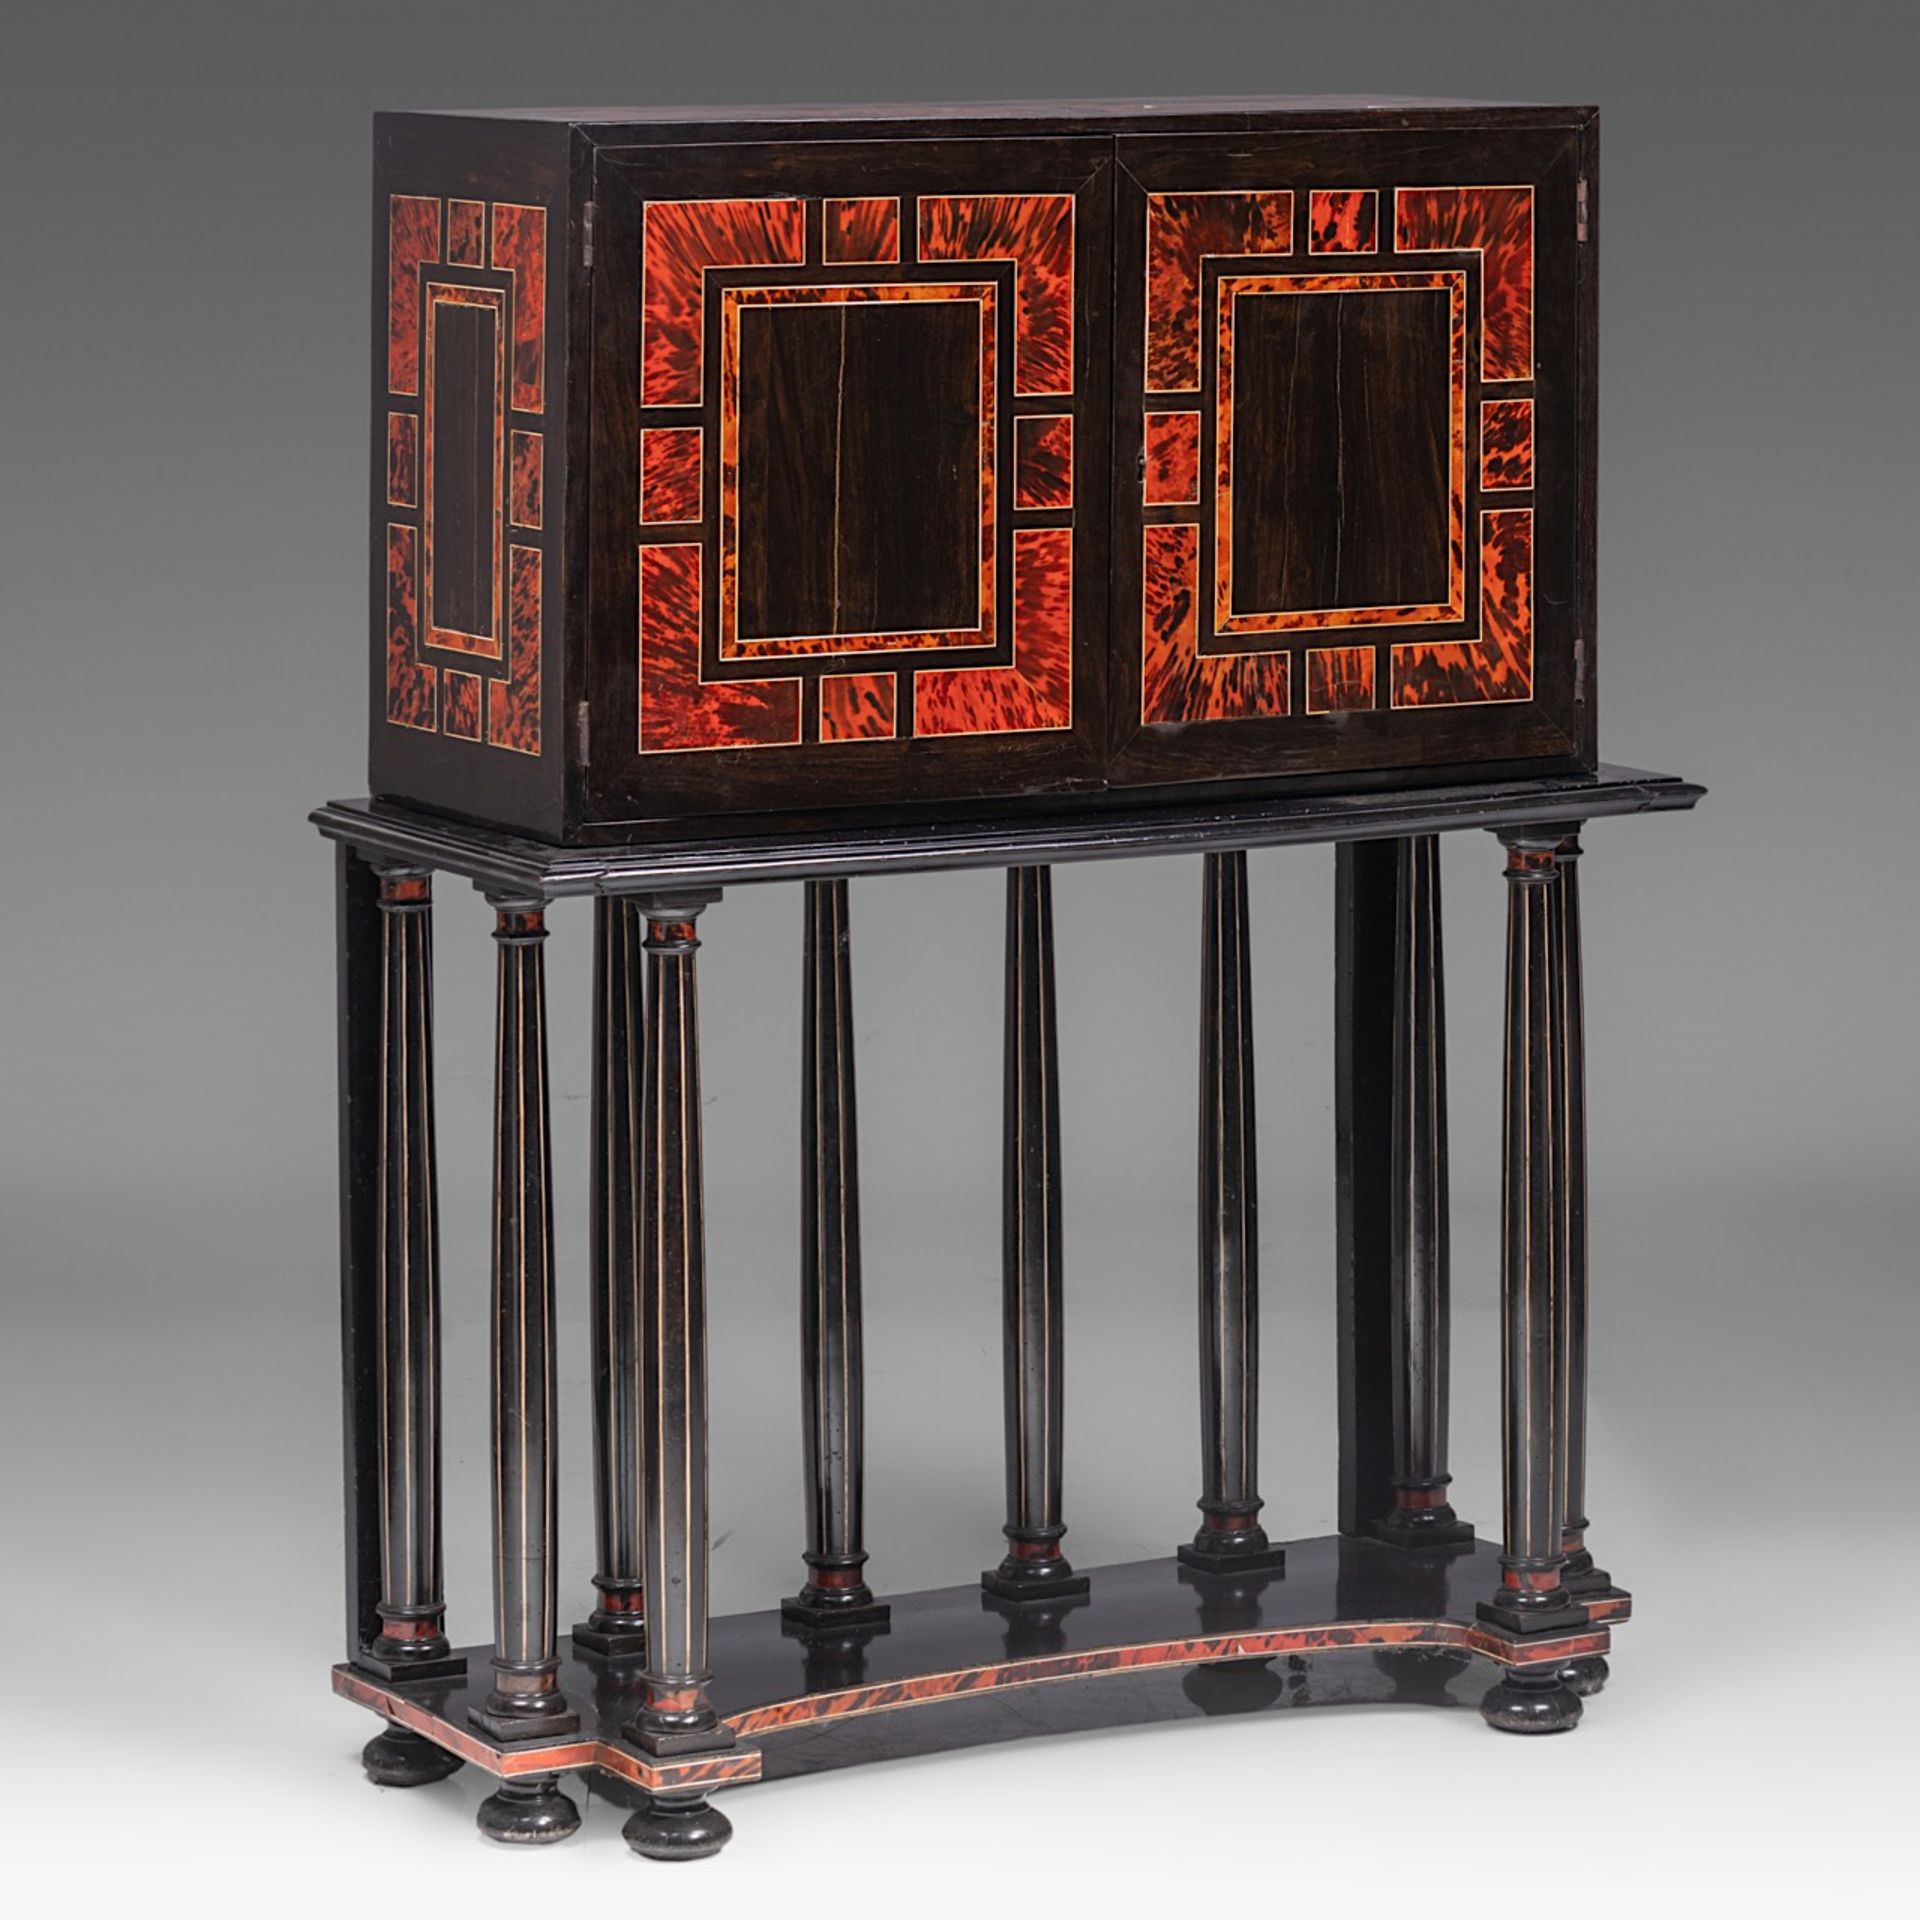 A 17thC Flemish Antwerp ebony, ivory and tortoiseshell cabinet-on-stand, H 137 cm (total) (+) - Image 3 of 9